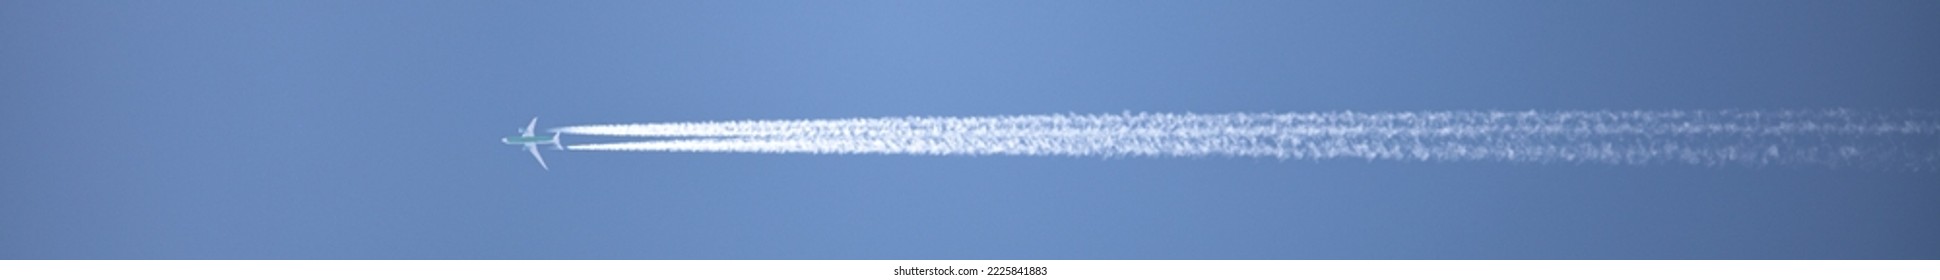 double track in the sky from a jet plane	